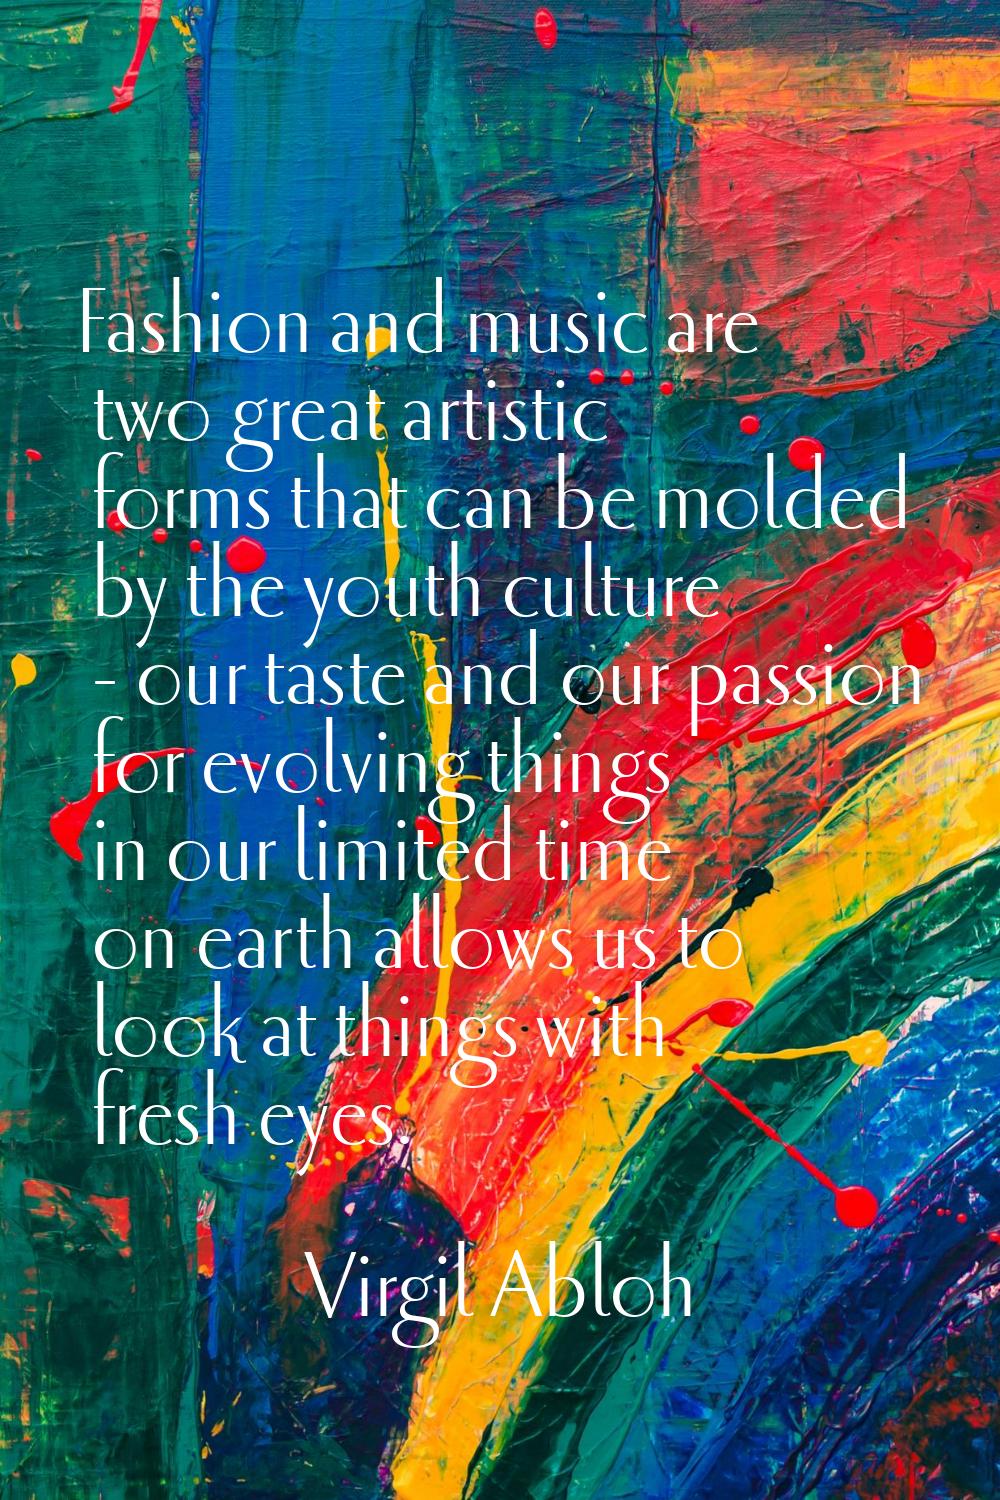 Fashion and music are two great artistic forms that can be molded by the youth culture - our taste 